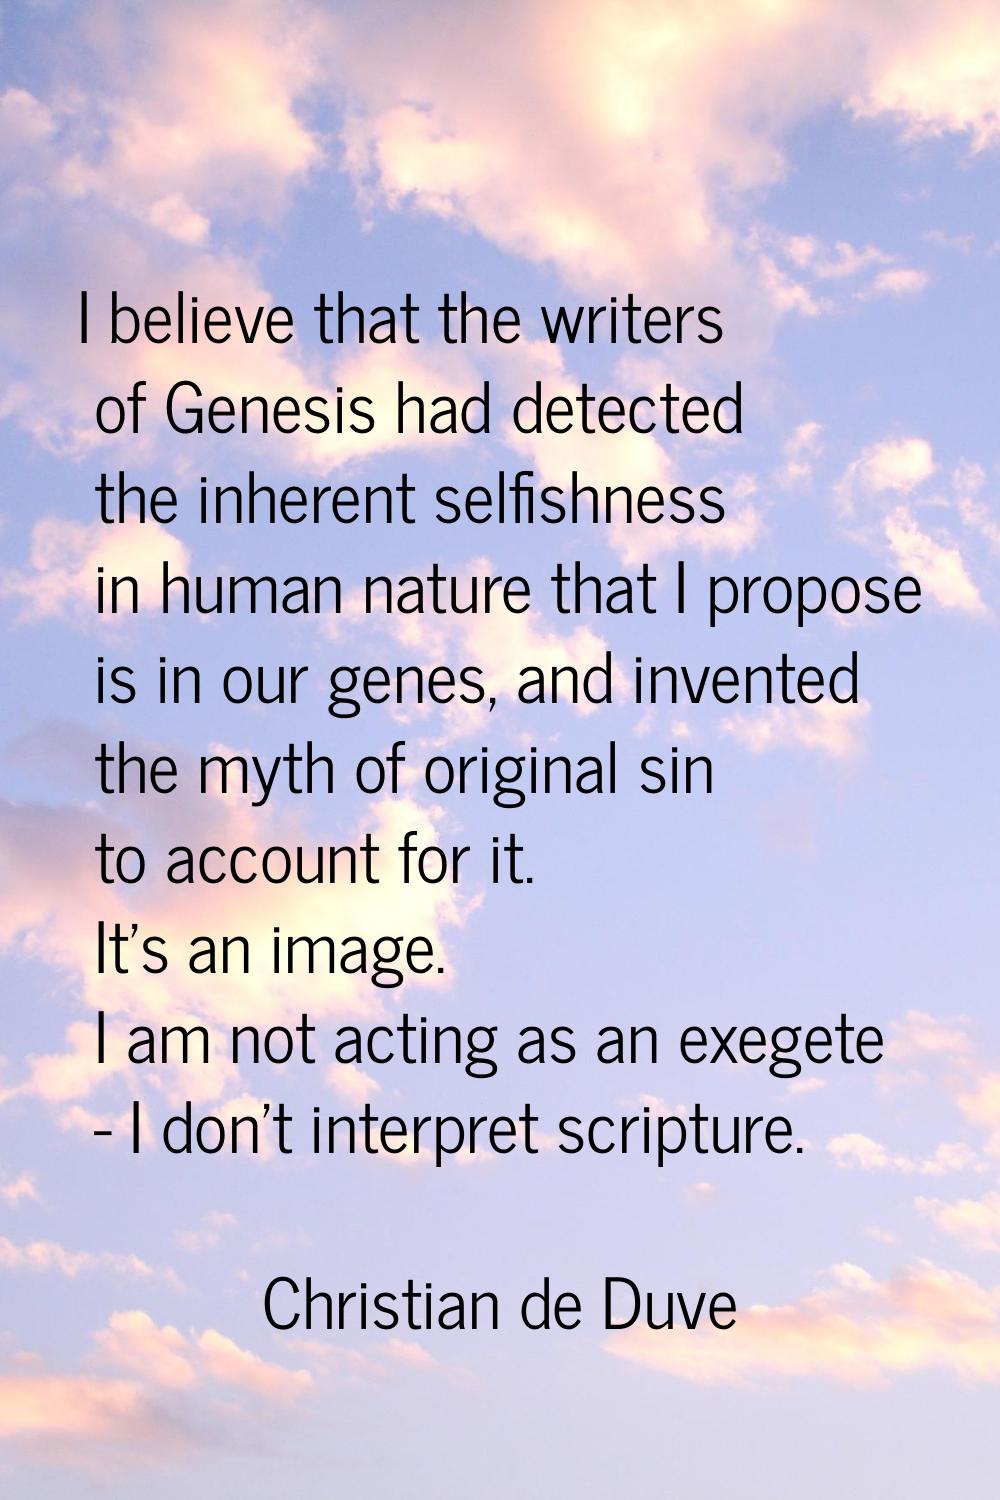 I believe that the writers of Genesis had detected the inherent selfishness in human nature that I 